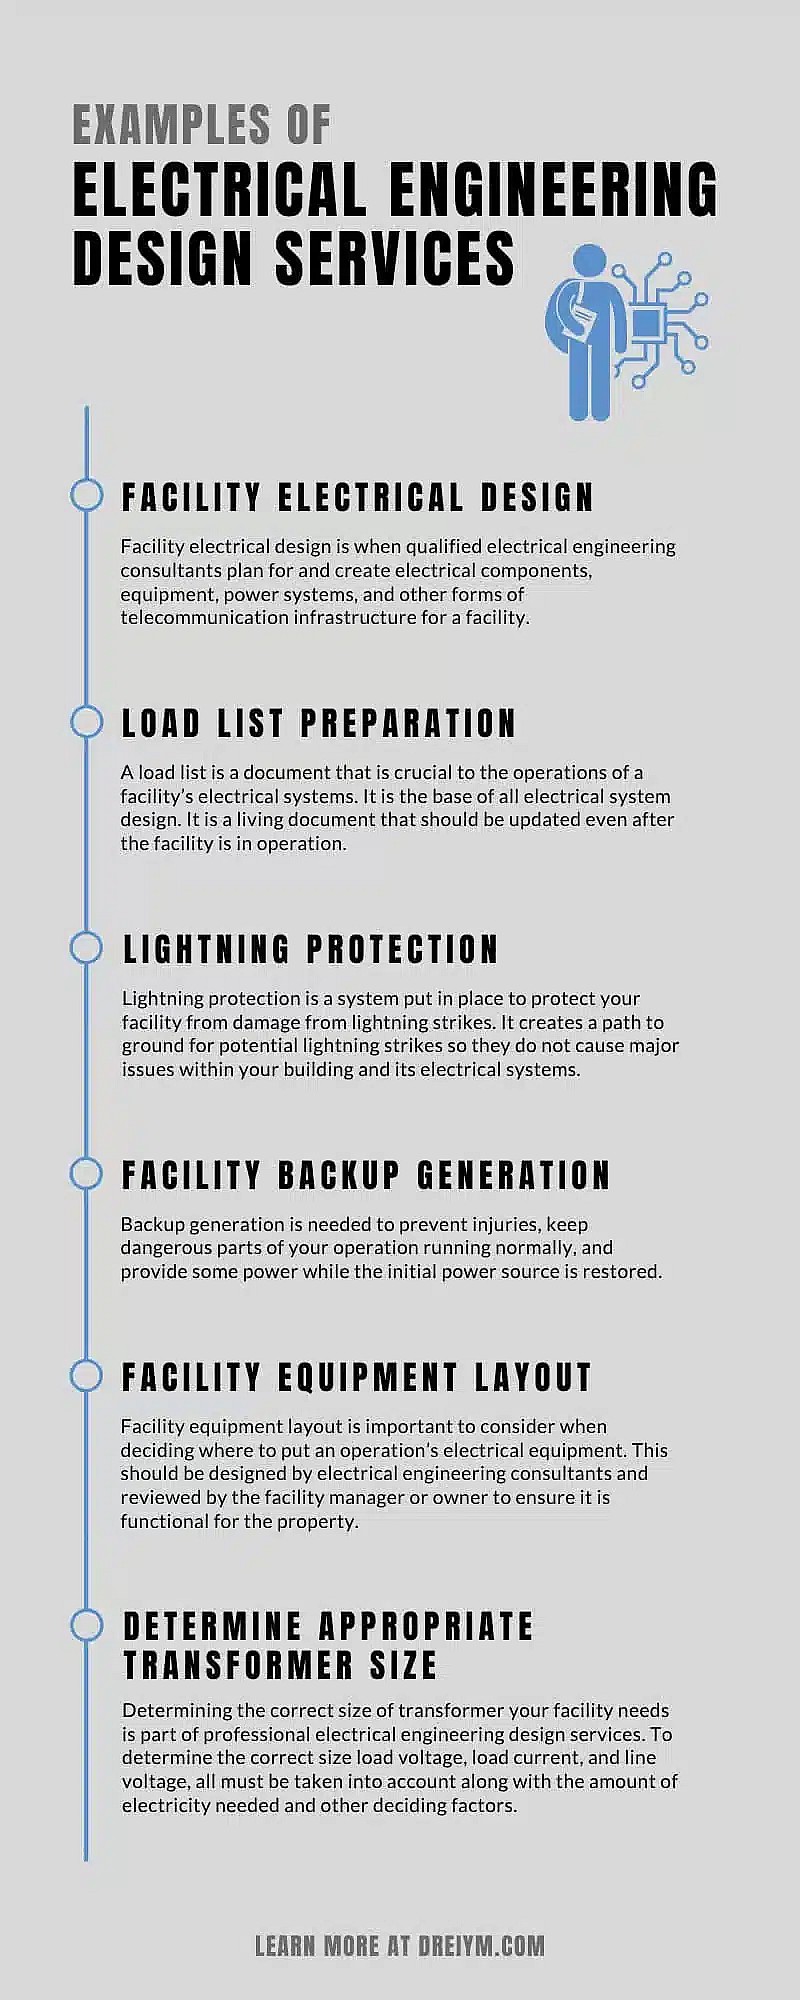 Examples of Electrical Engineering Design Services